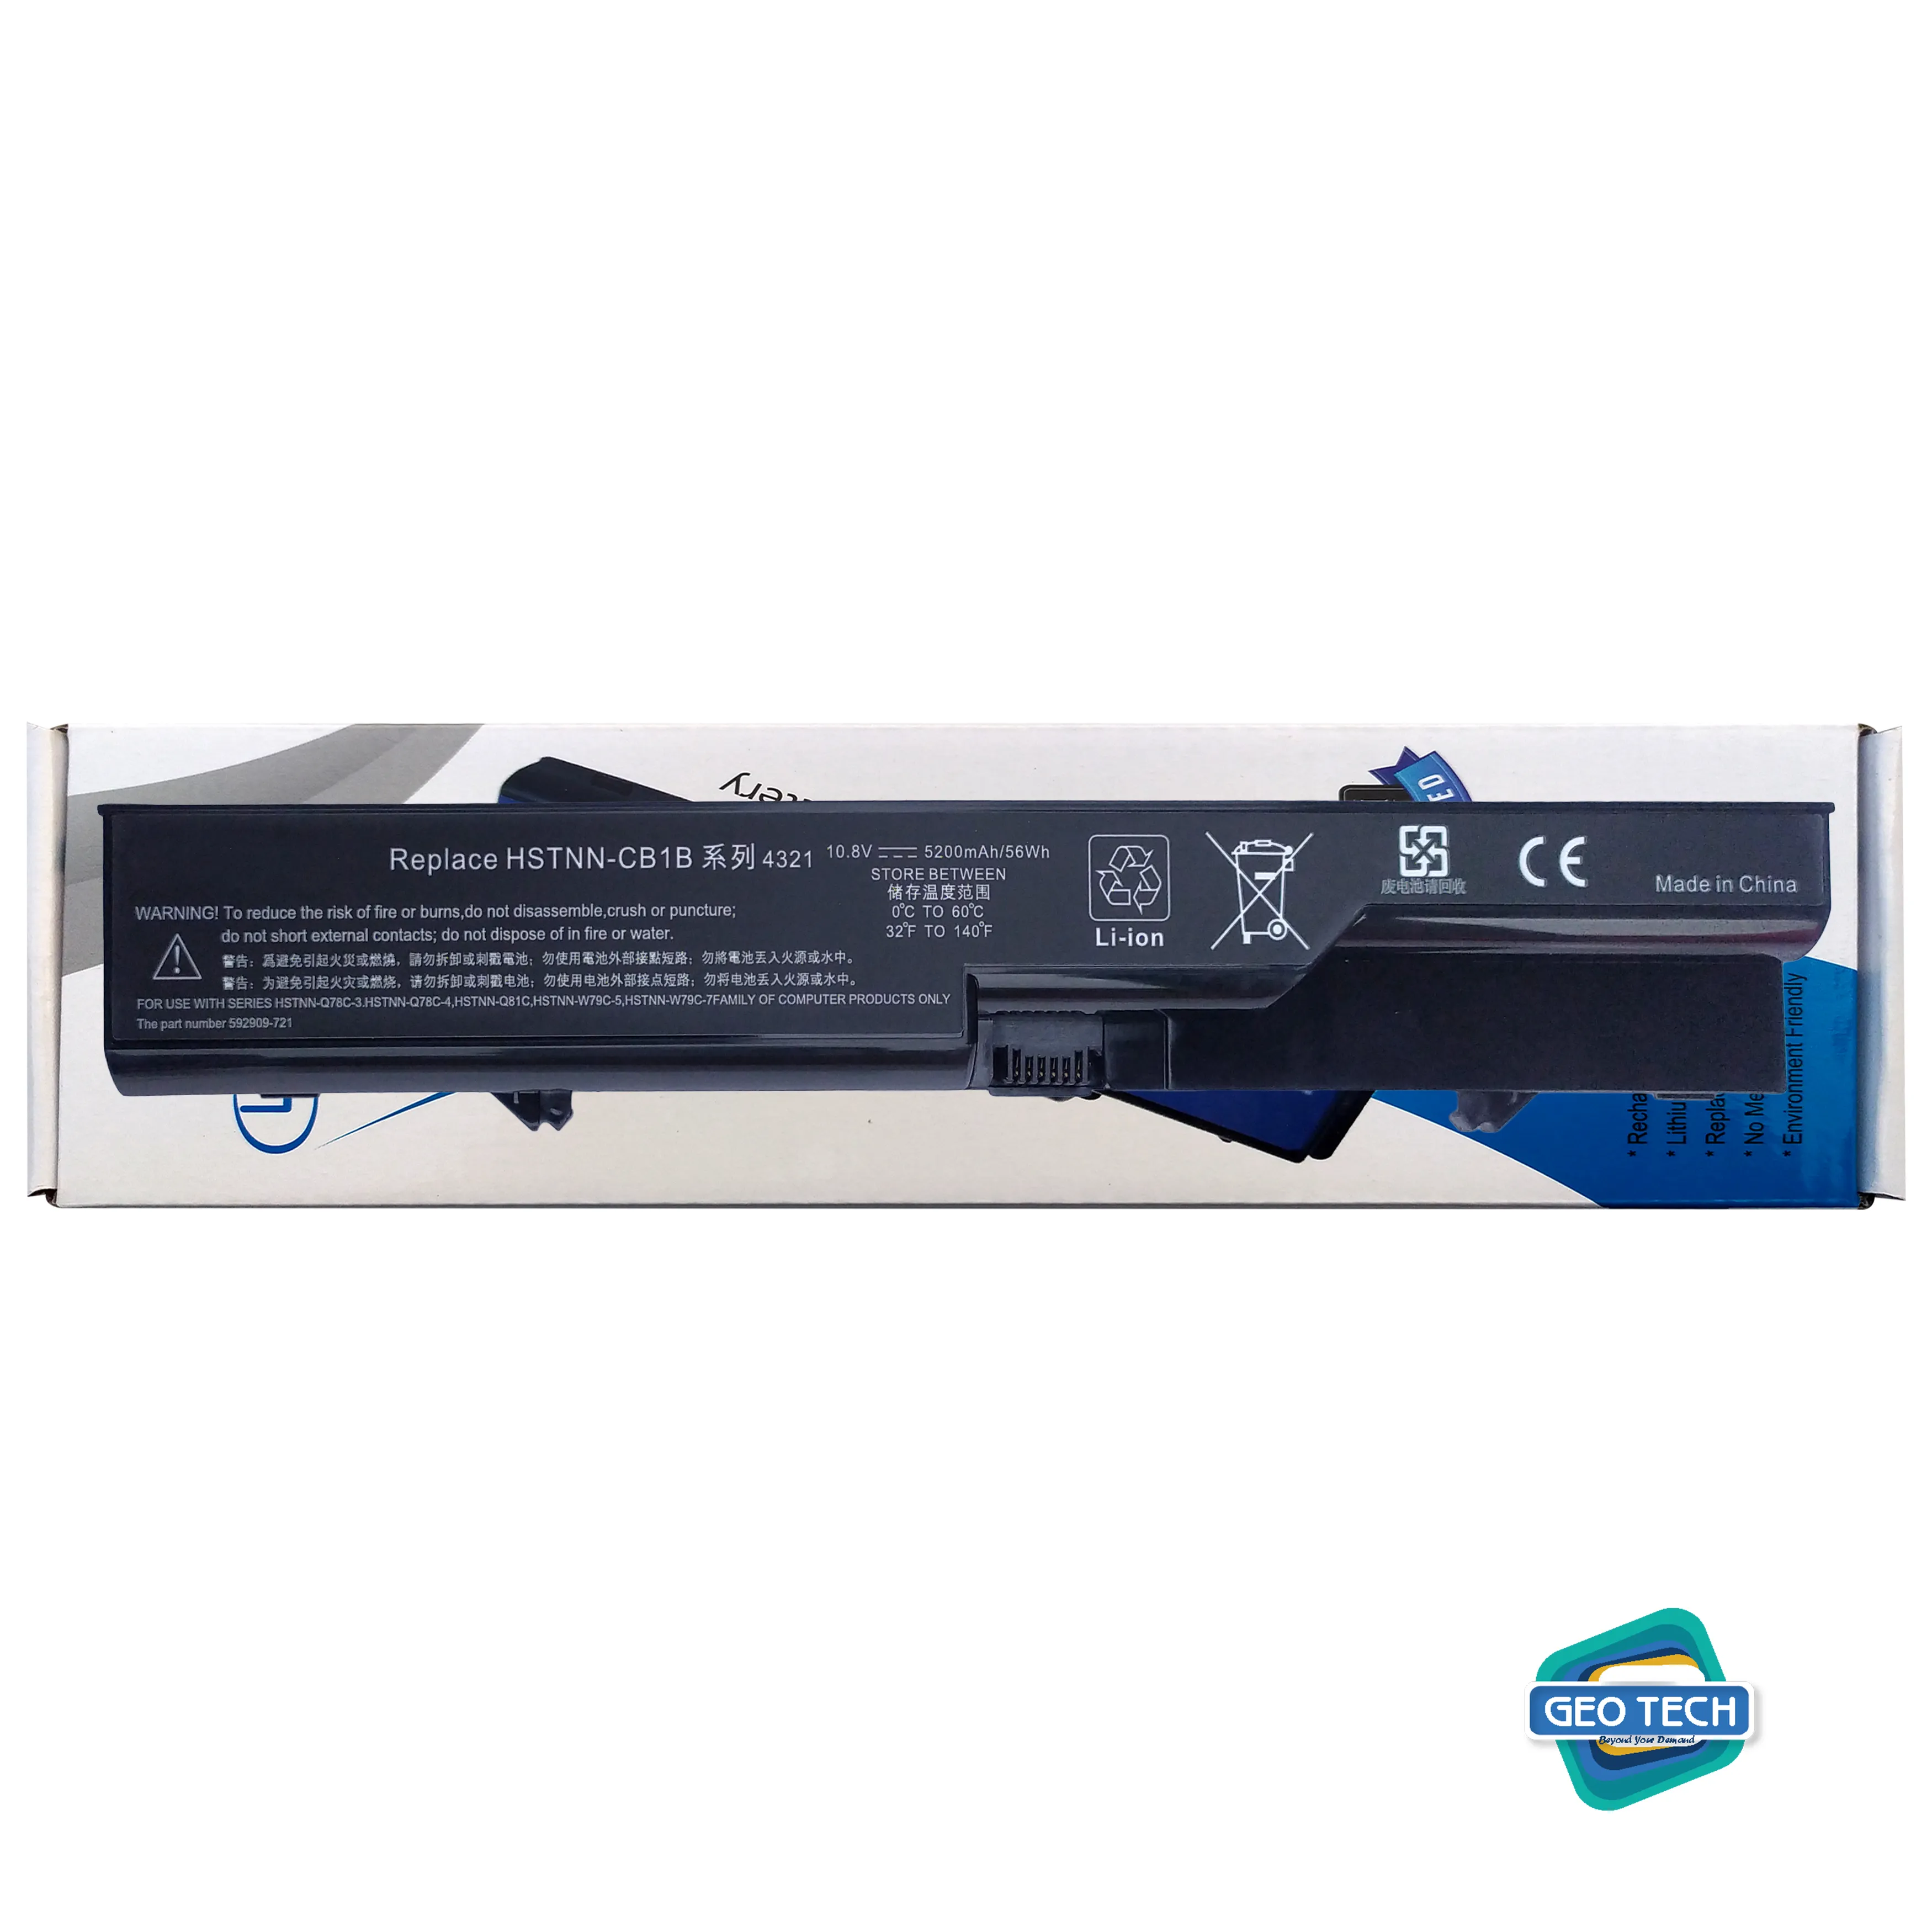 Laptop Battery HP 4420S HP Laptop battery For HP Compaq 420, 320, HP ProBook 4420s, 4320s, 4321s, 4325s, 4326s, 4421s, 4425s, 4520s 4525s Series